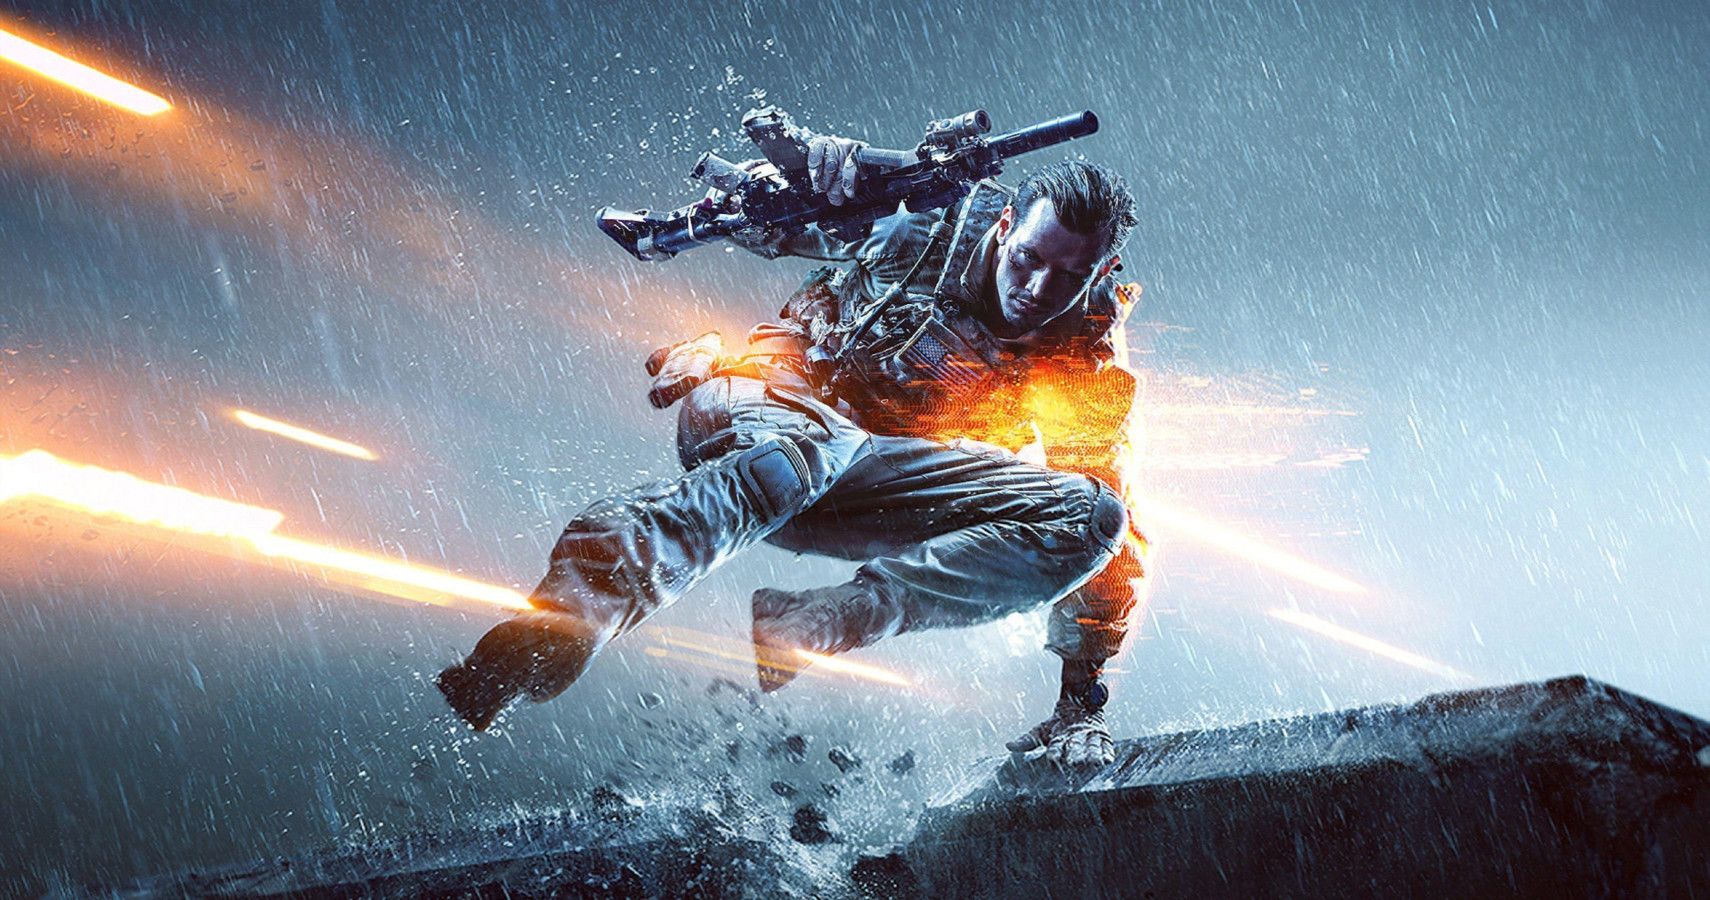 Thegamerwebsite Insider Claims That 80 Of The Battlefield 6 Trailer Has Been Leaked Steam News - what is the length of a roblox trailer